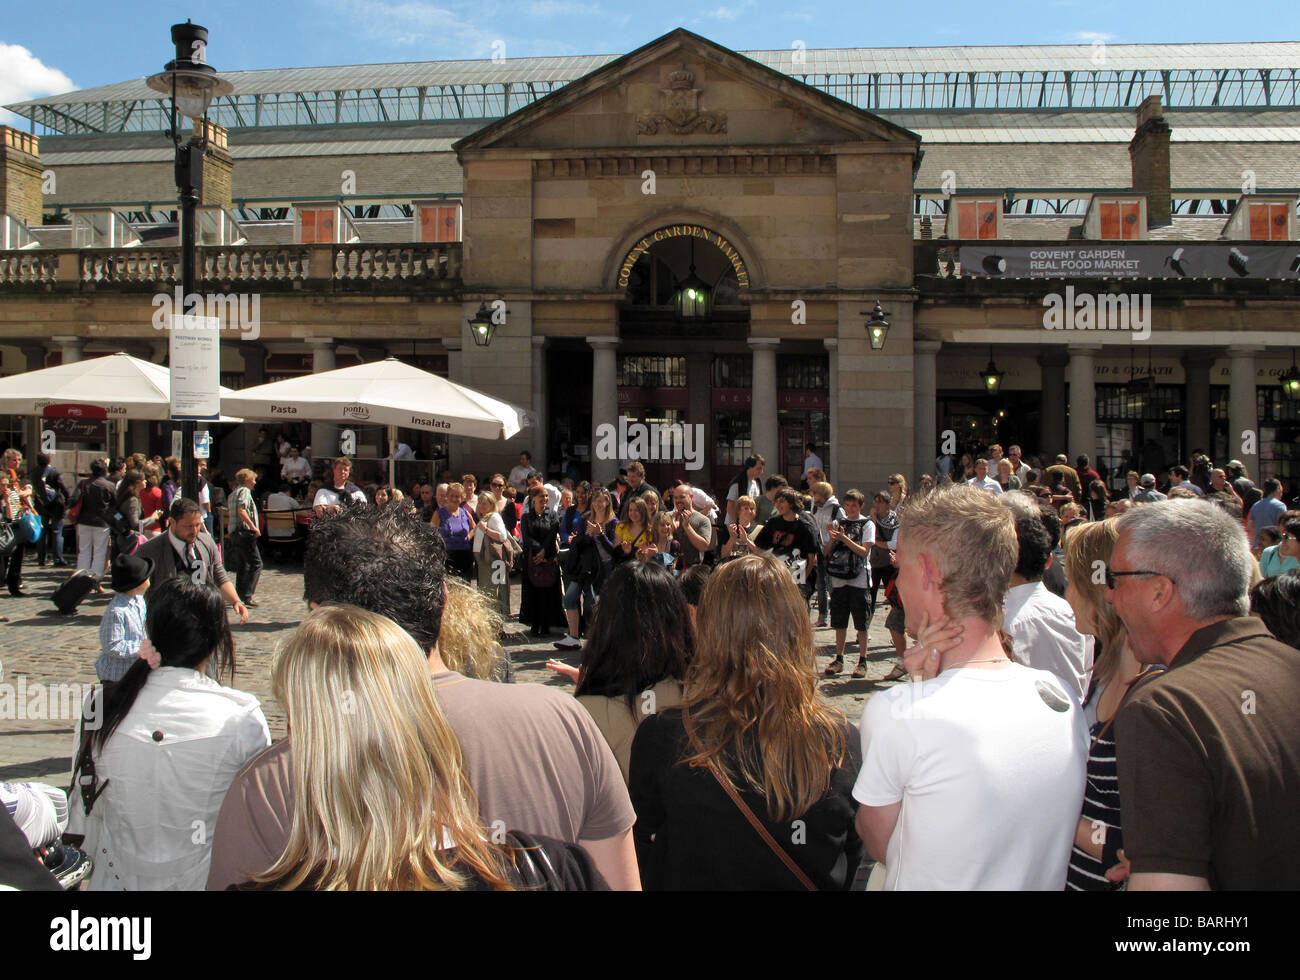 Crowds of tourists watching street artists busking in the sunshine outside Covent Garden Market in London. Stock Photo